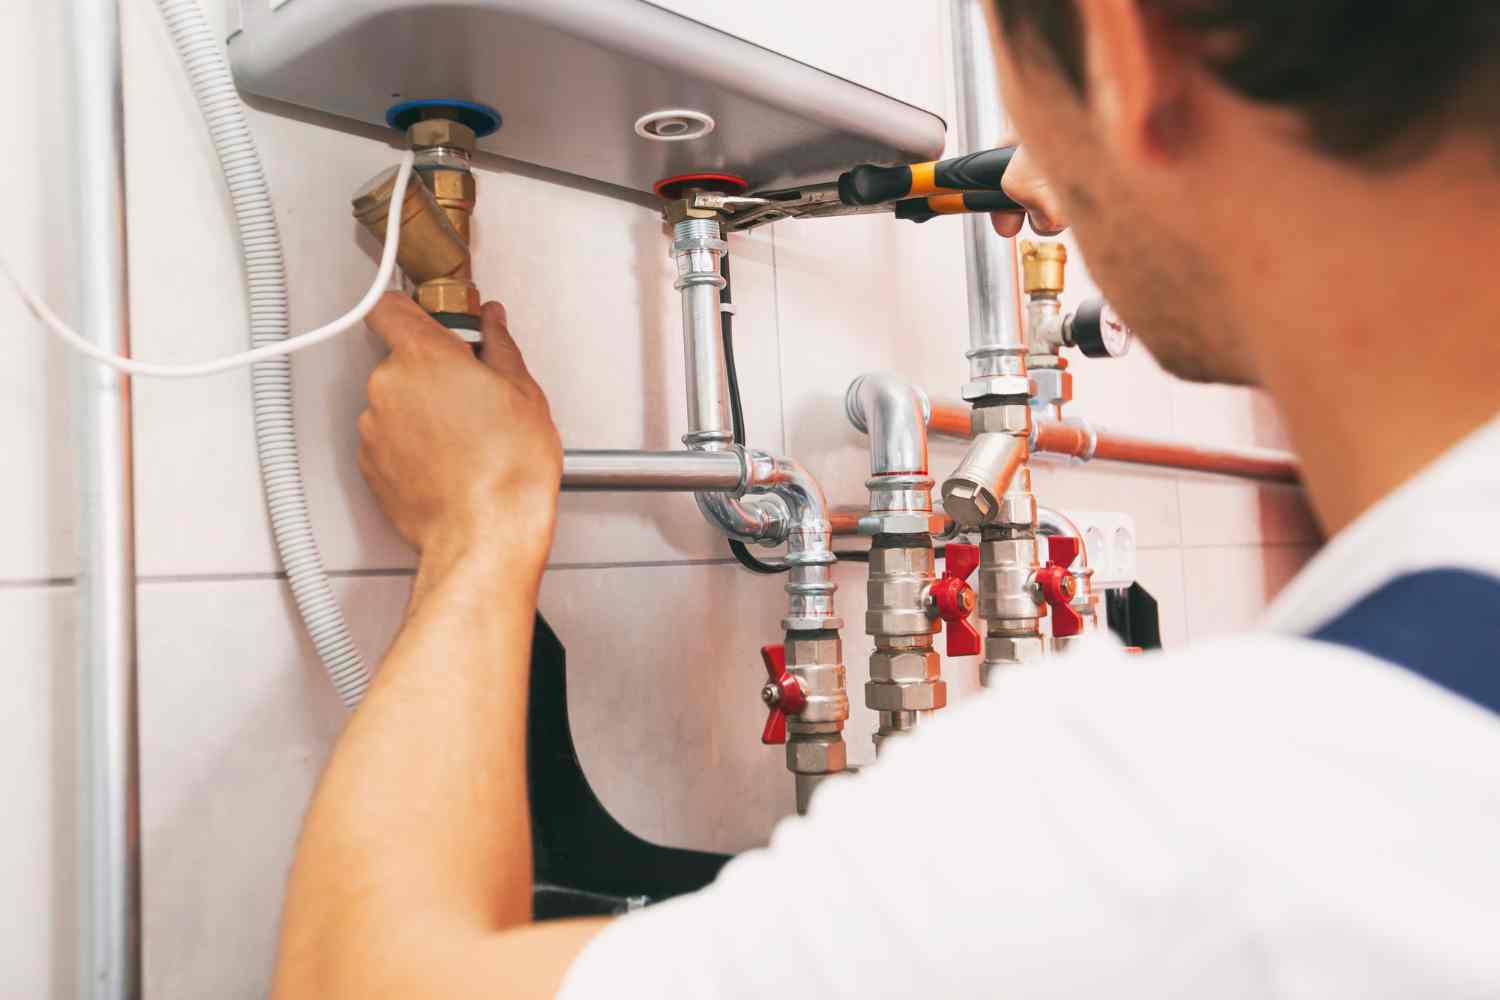 Installation of the Electric Boiler